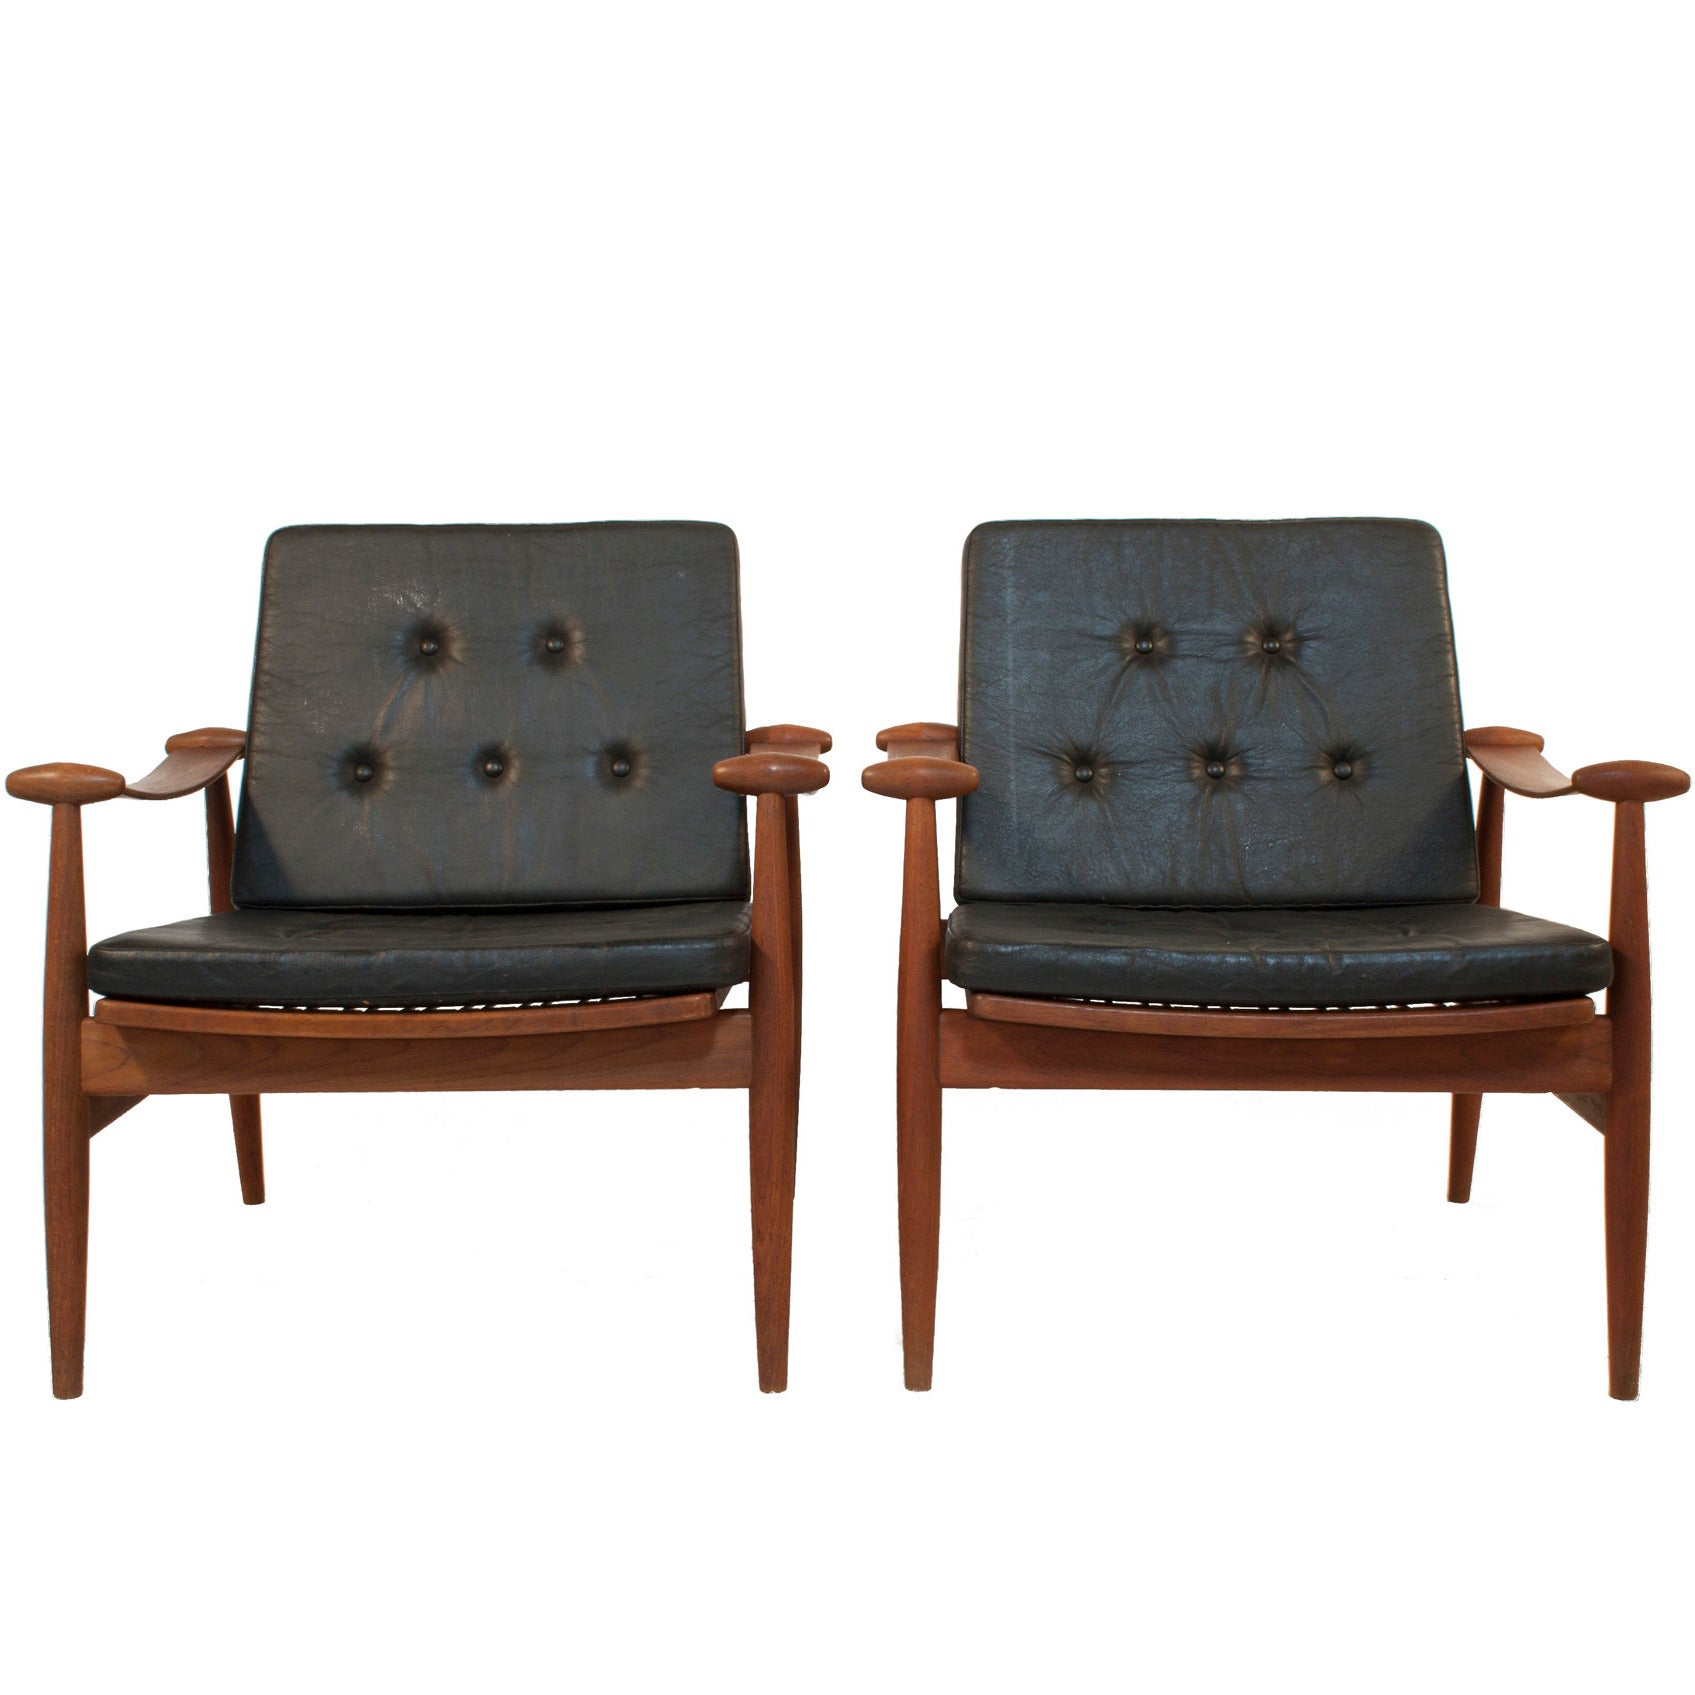 Pair of "Spade Chairs" by Finn Juhl For Sale